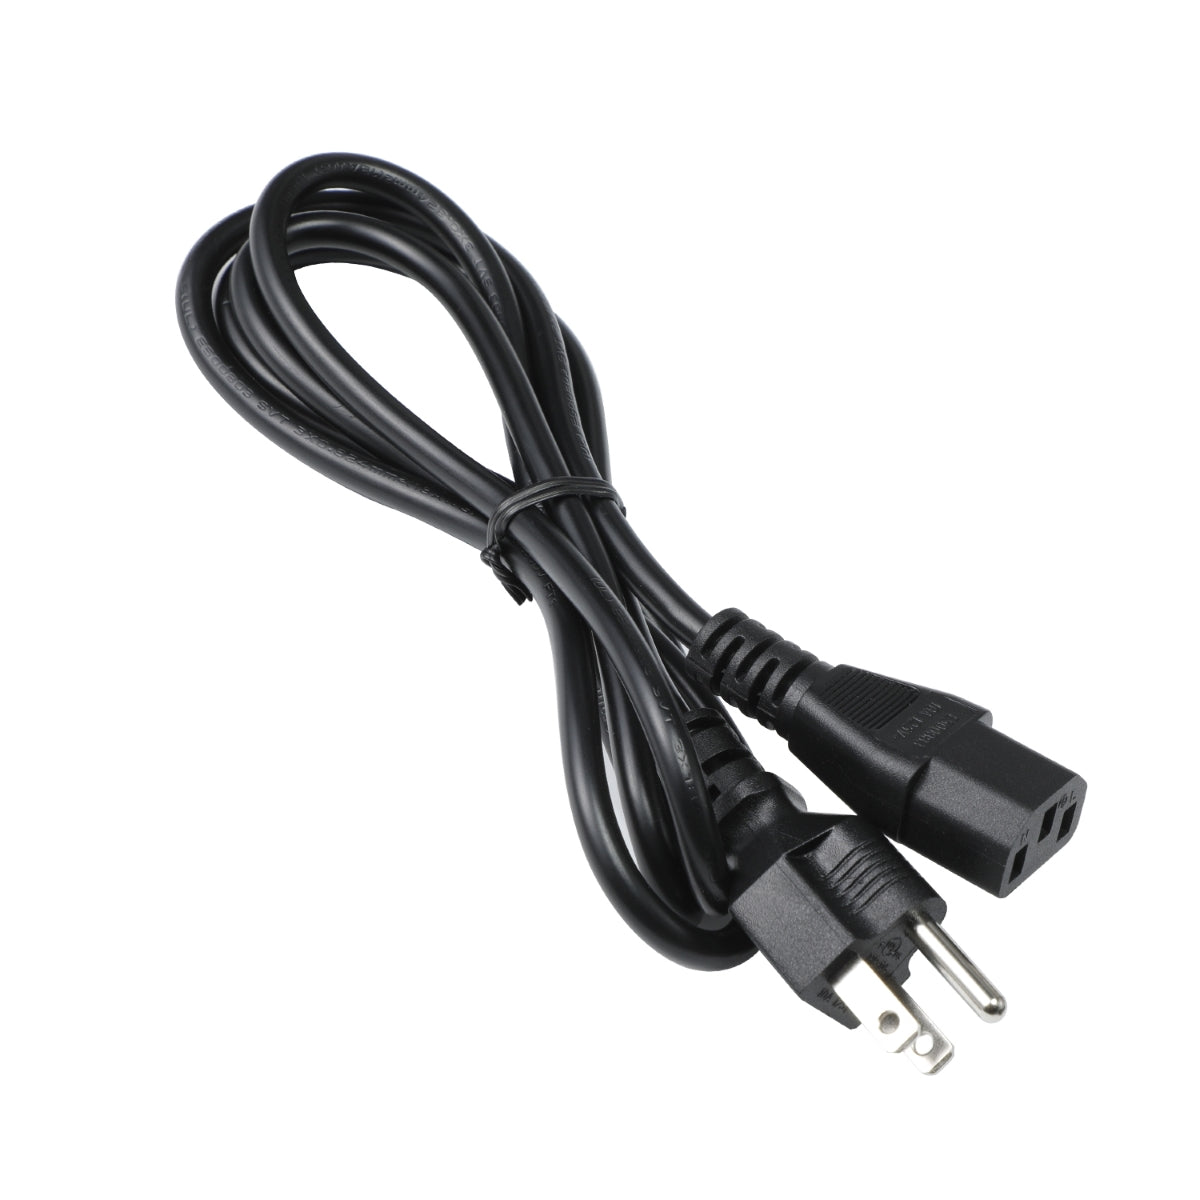 Power Cable for SONY PlayStation 3.